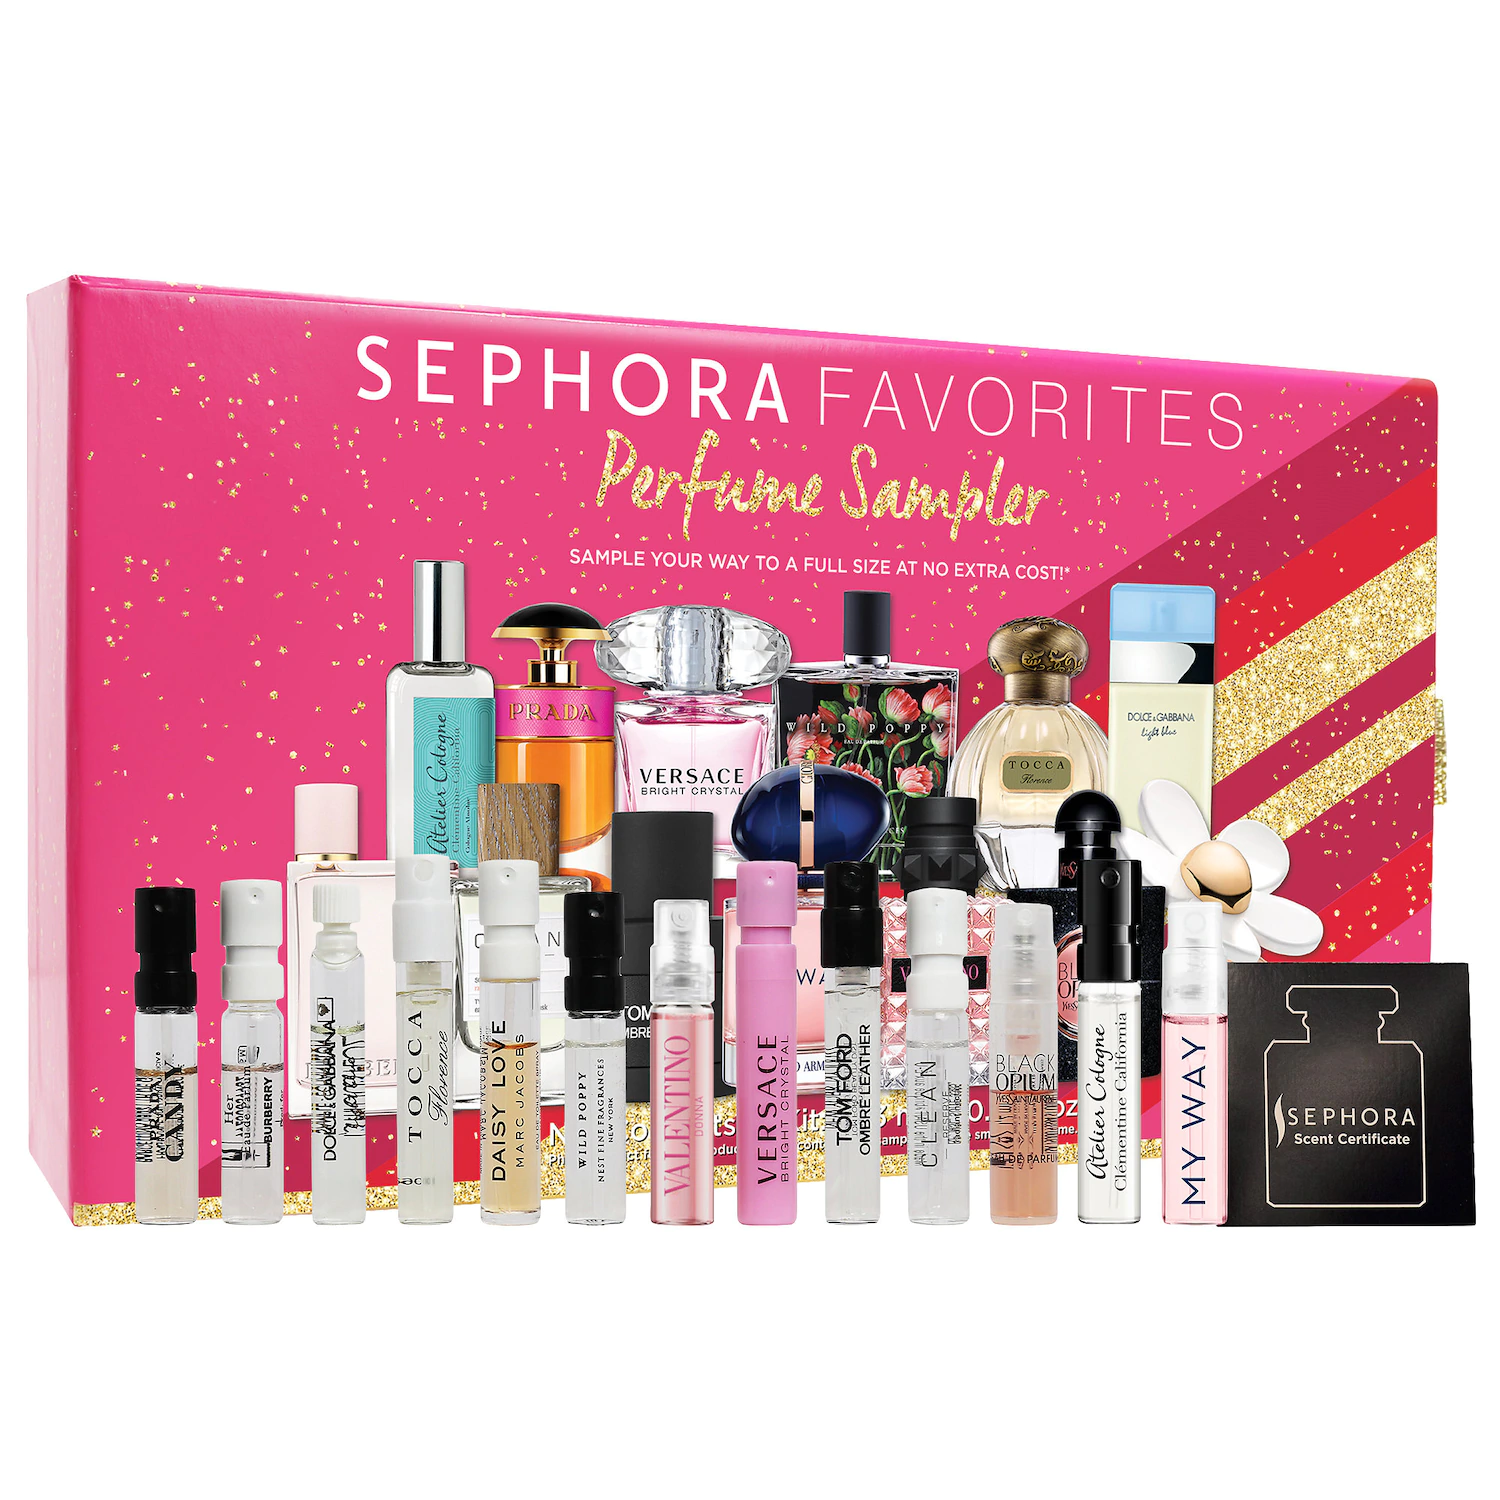 Sephora Favorites Holiday Perfume Sampler Set Available Now + Coupons! -  Hello Subscription